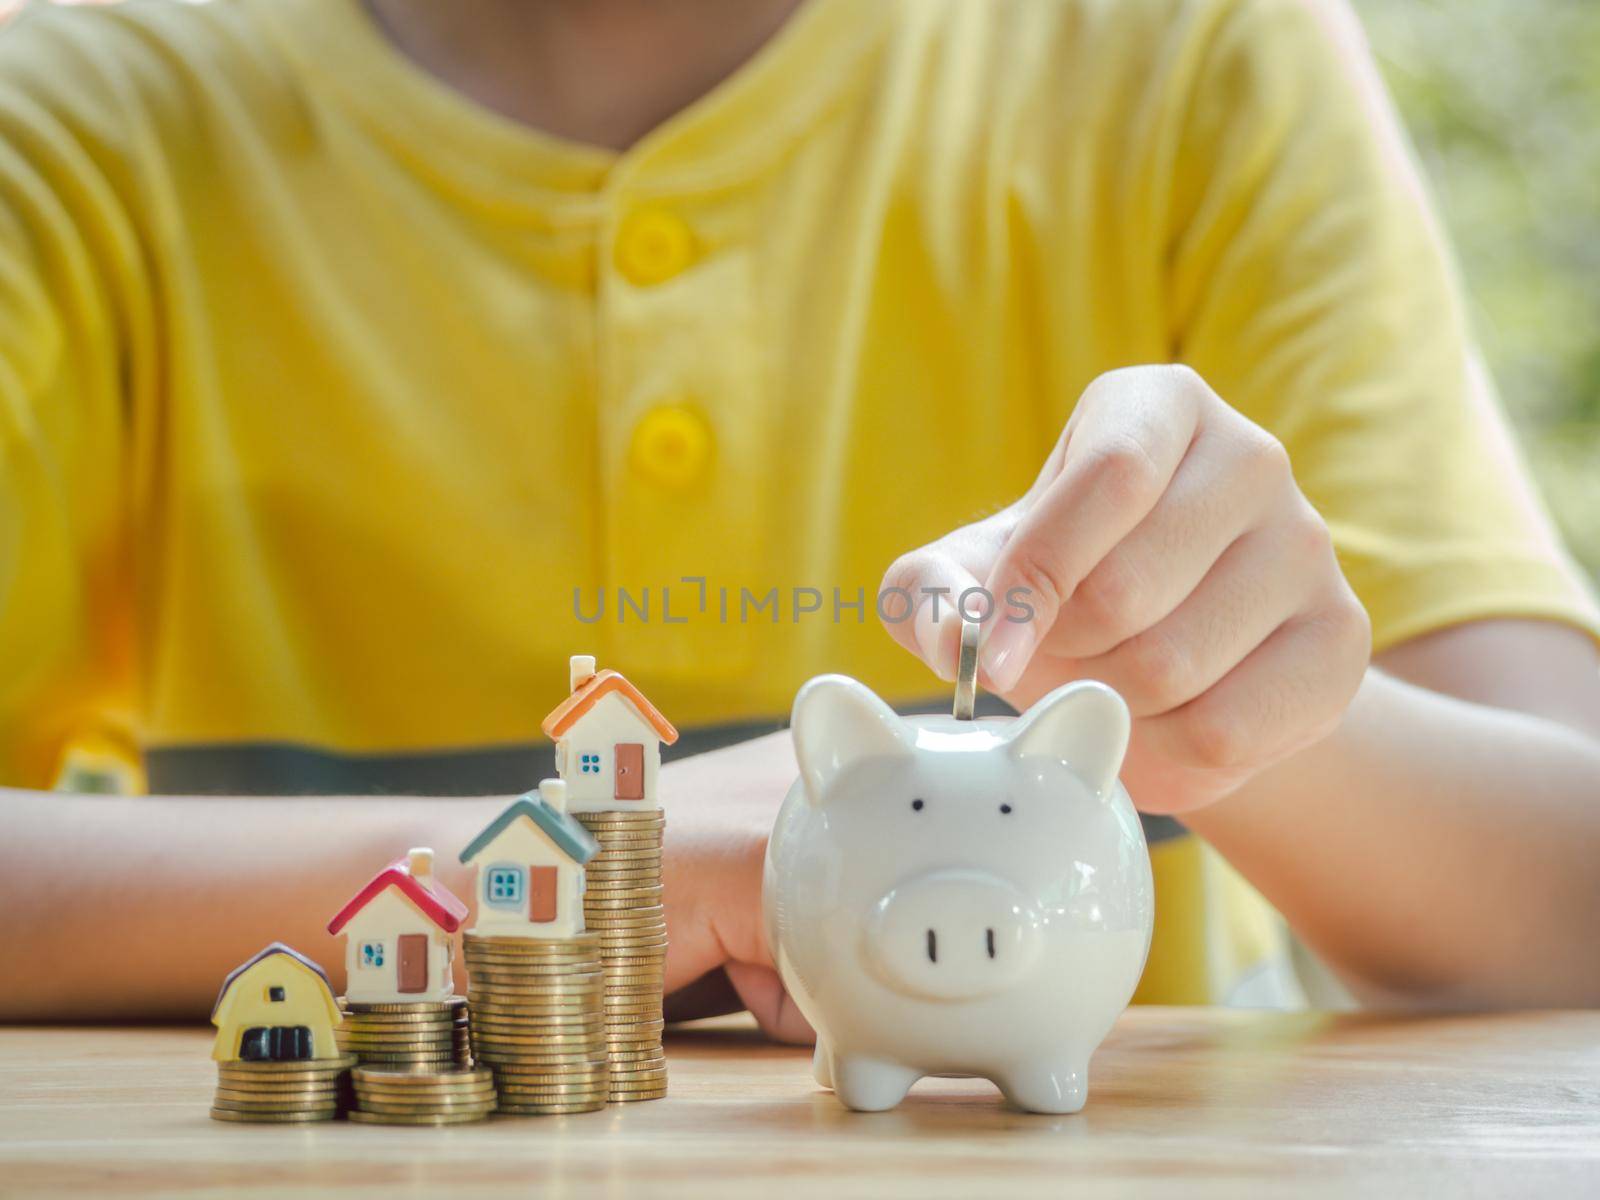 Asian boy holding coins drop a container saving money to save money invest for future and buy home.Concept loan, property ladder, financial, real estate investment and bonus. by Chakreeyarut